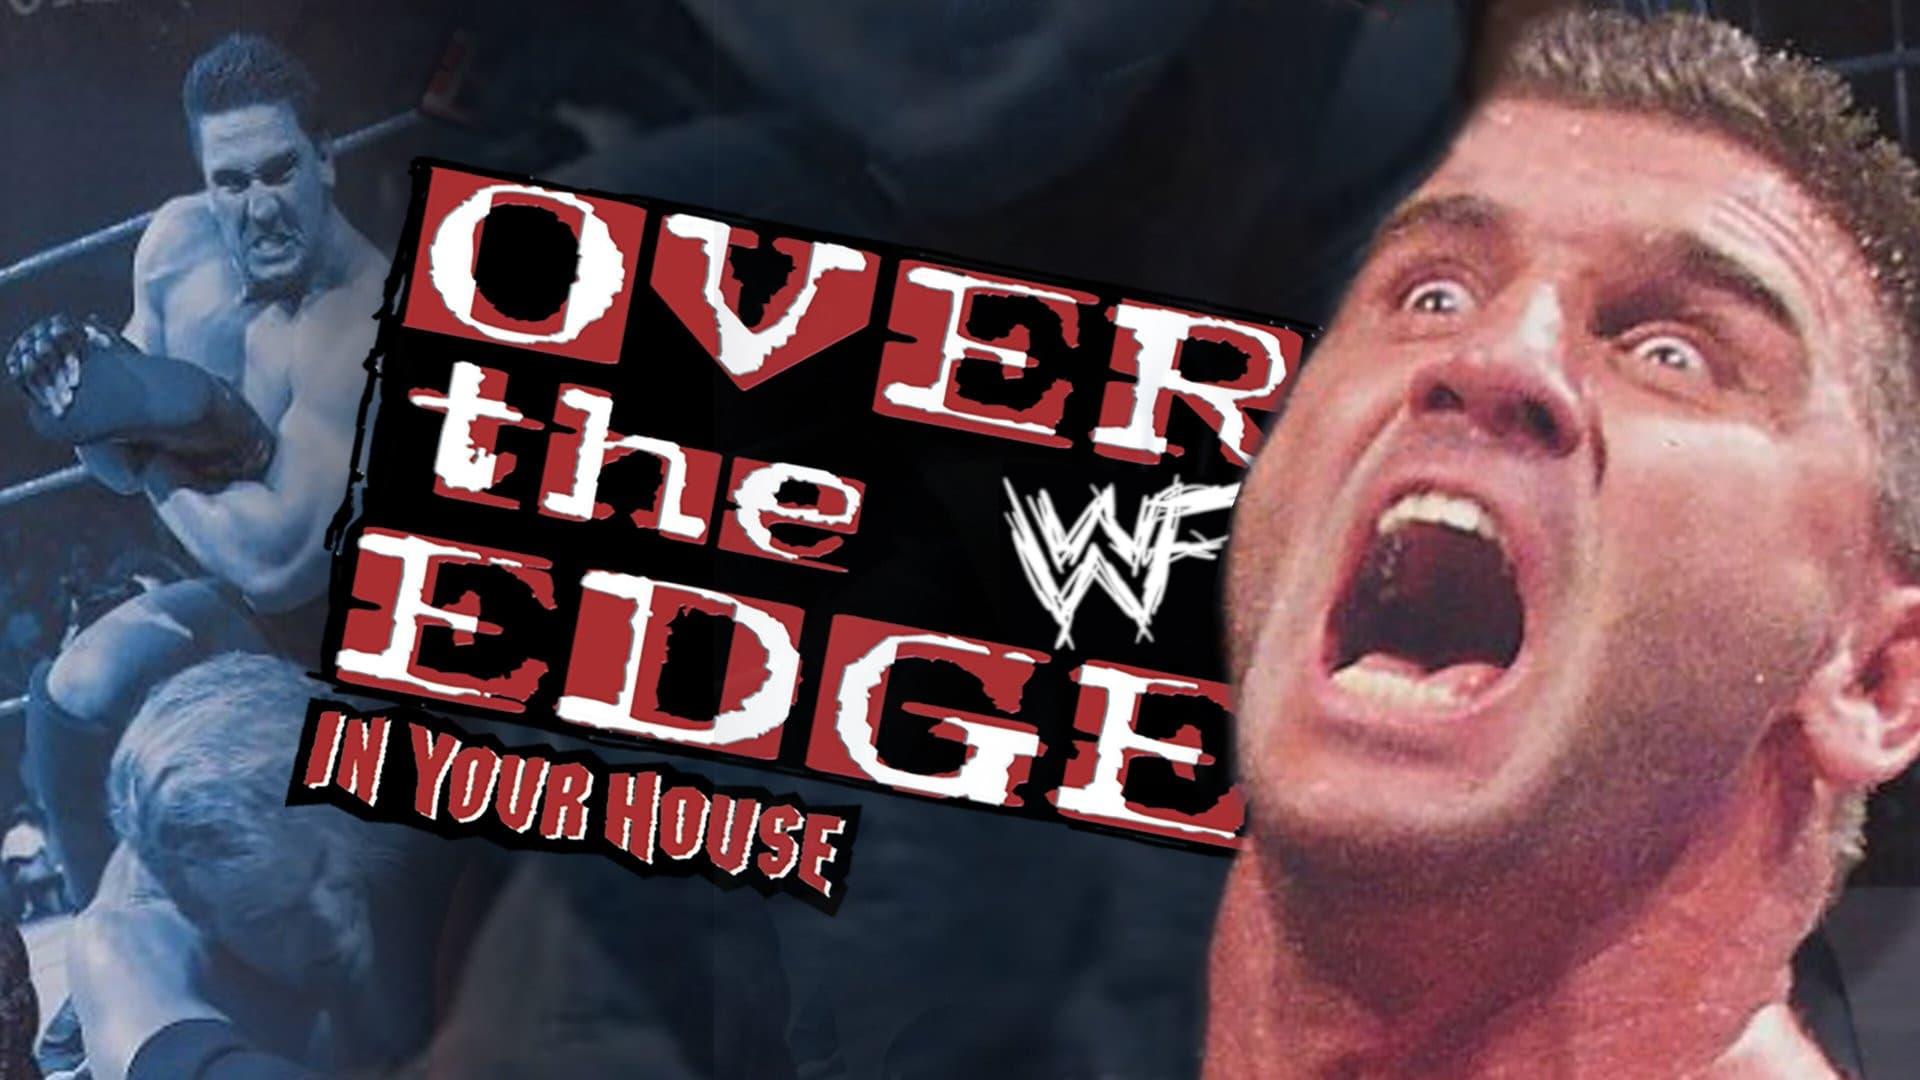 WWE Over the Edge: In Your House backdrop